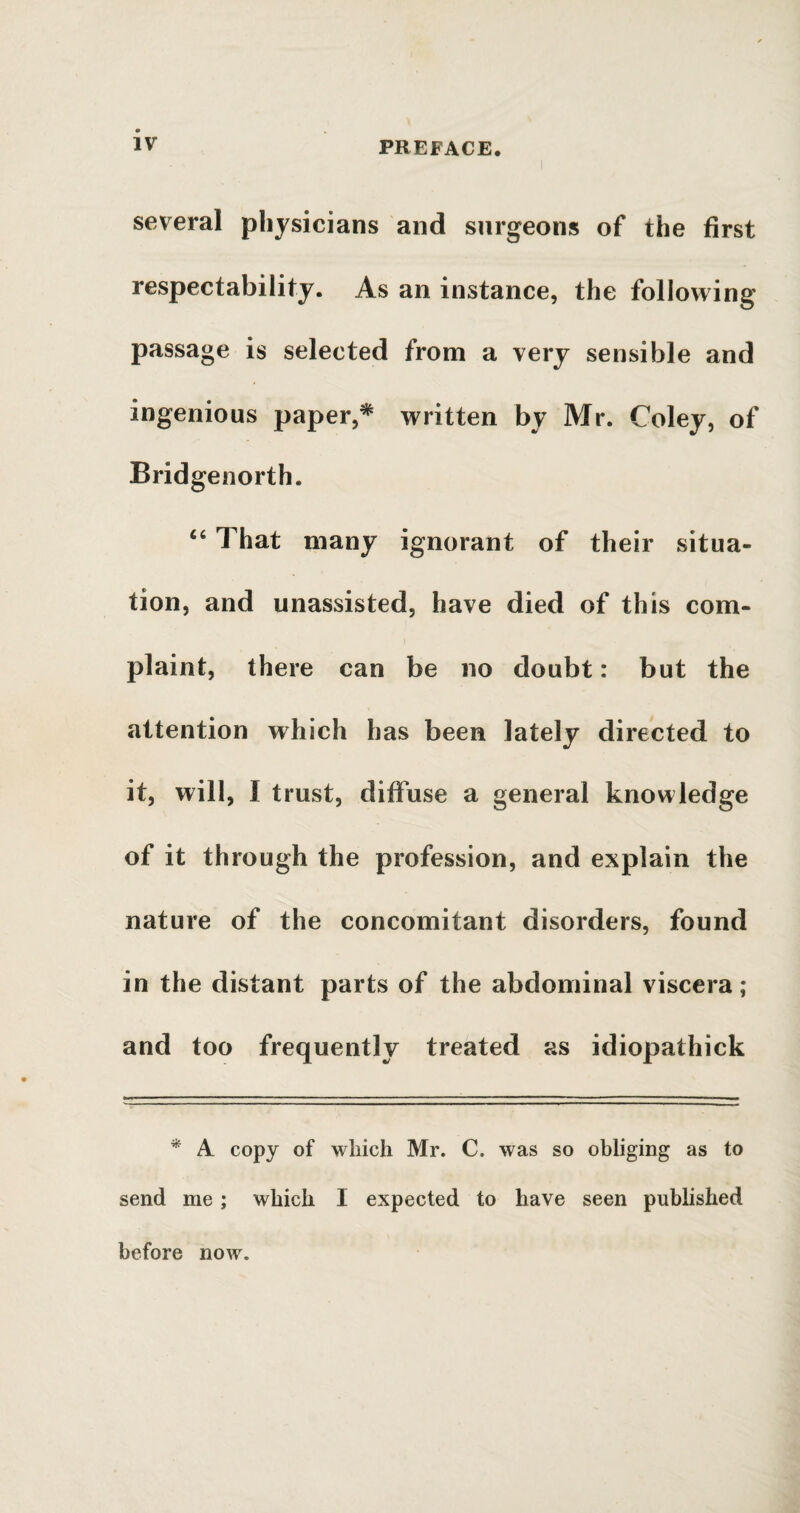 several physicians and surgeons of the first respectability. As an instance, the following passage is selected from a very sensible and ingenious paper,* written by Mr. Coley, of Bridgenorth. 46 That many ignorant of their situa¬ tion, and unassisted, have died of this com¬ plaint, there can be no doubt: but the attention which has been lately directed to it, will, I trust, diffuse a general knowledge of it through the profession, and explain the nature of the concomitant disorders, found in the distant parts of the abdominal viscera; and too frequently treated as idiopathick * A copy of which Mr. C. was so obliging as to send me ; which I expected to have seen published before now.